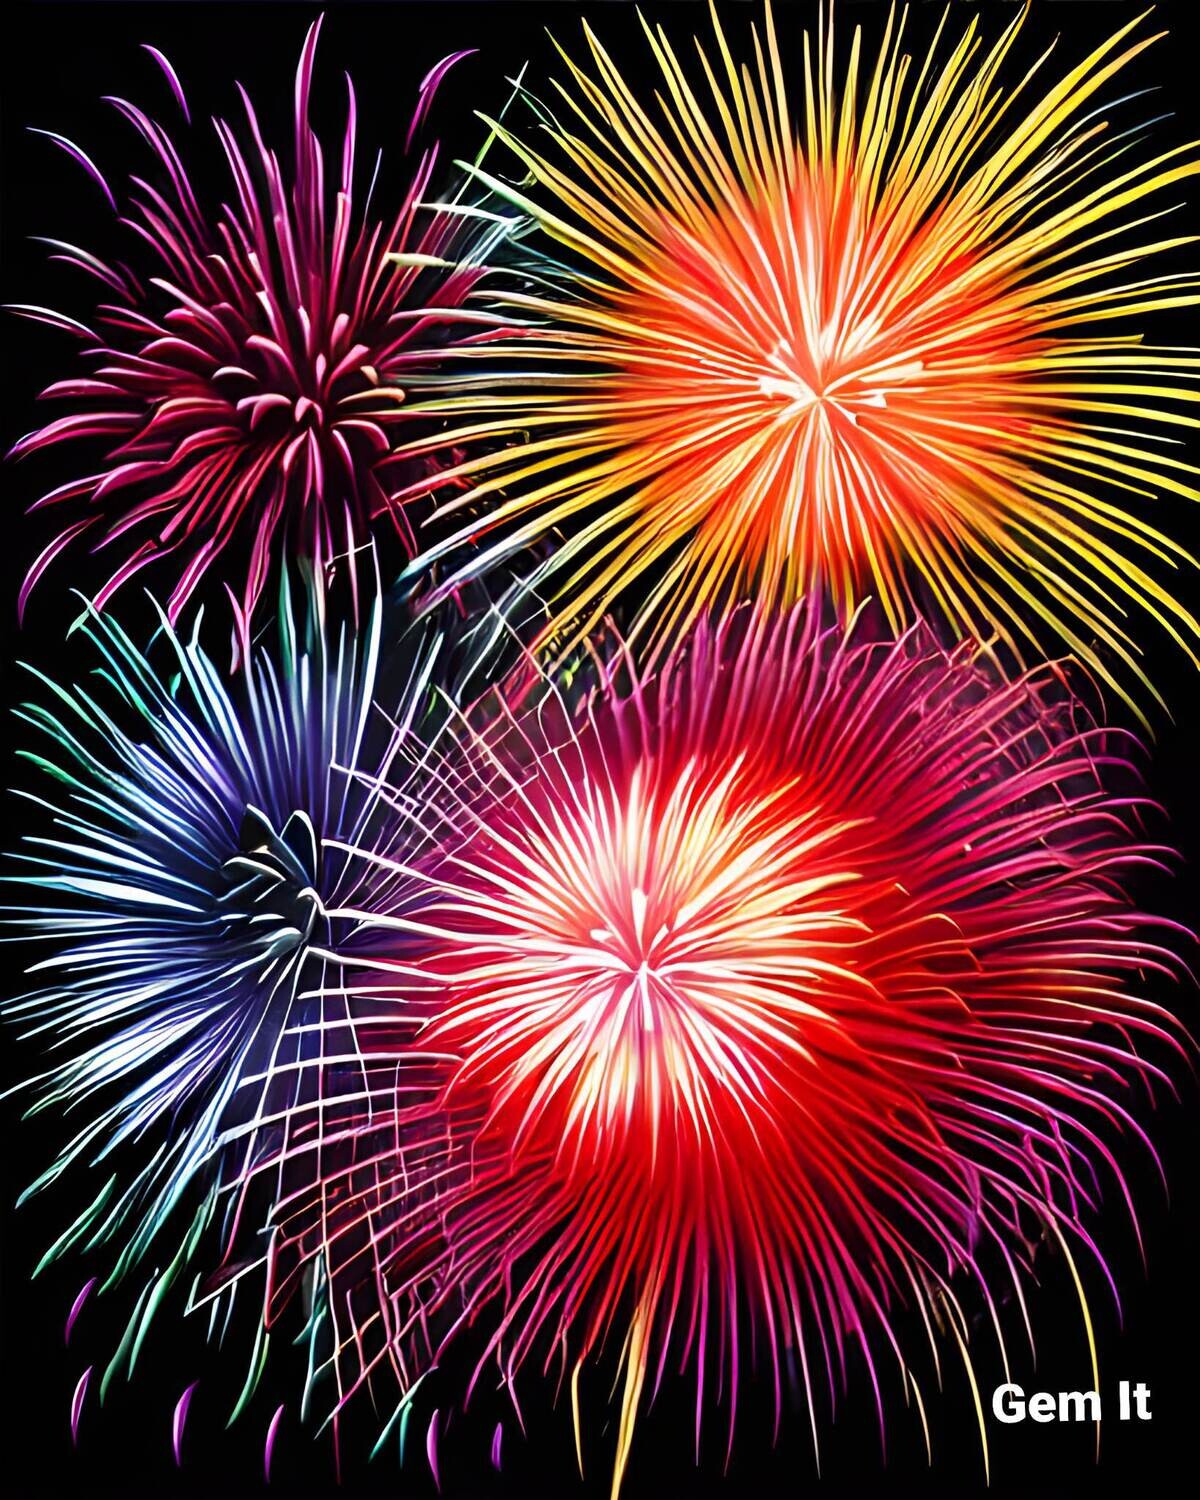 Fireworks 3 - Specially ordered for you. Delivery is approximately 4 - 6 weeks.